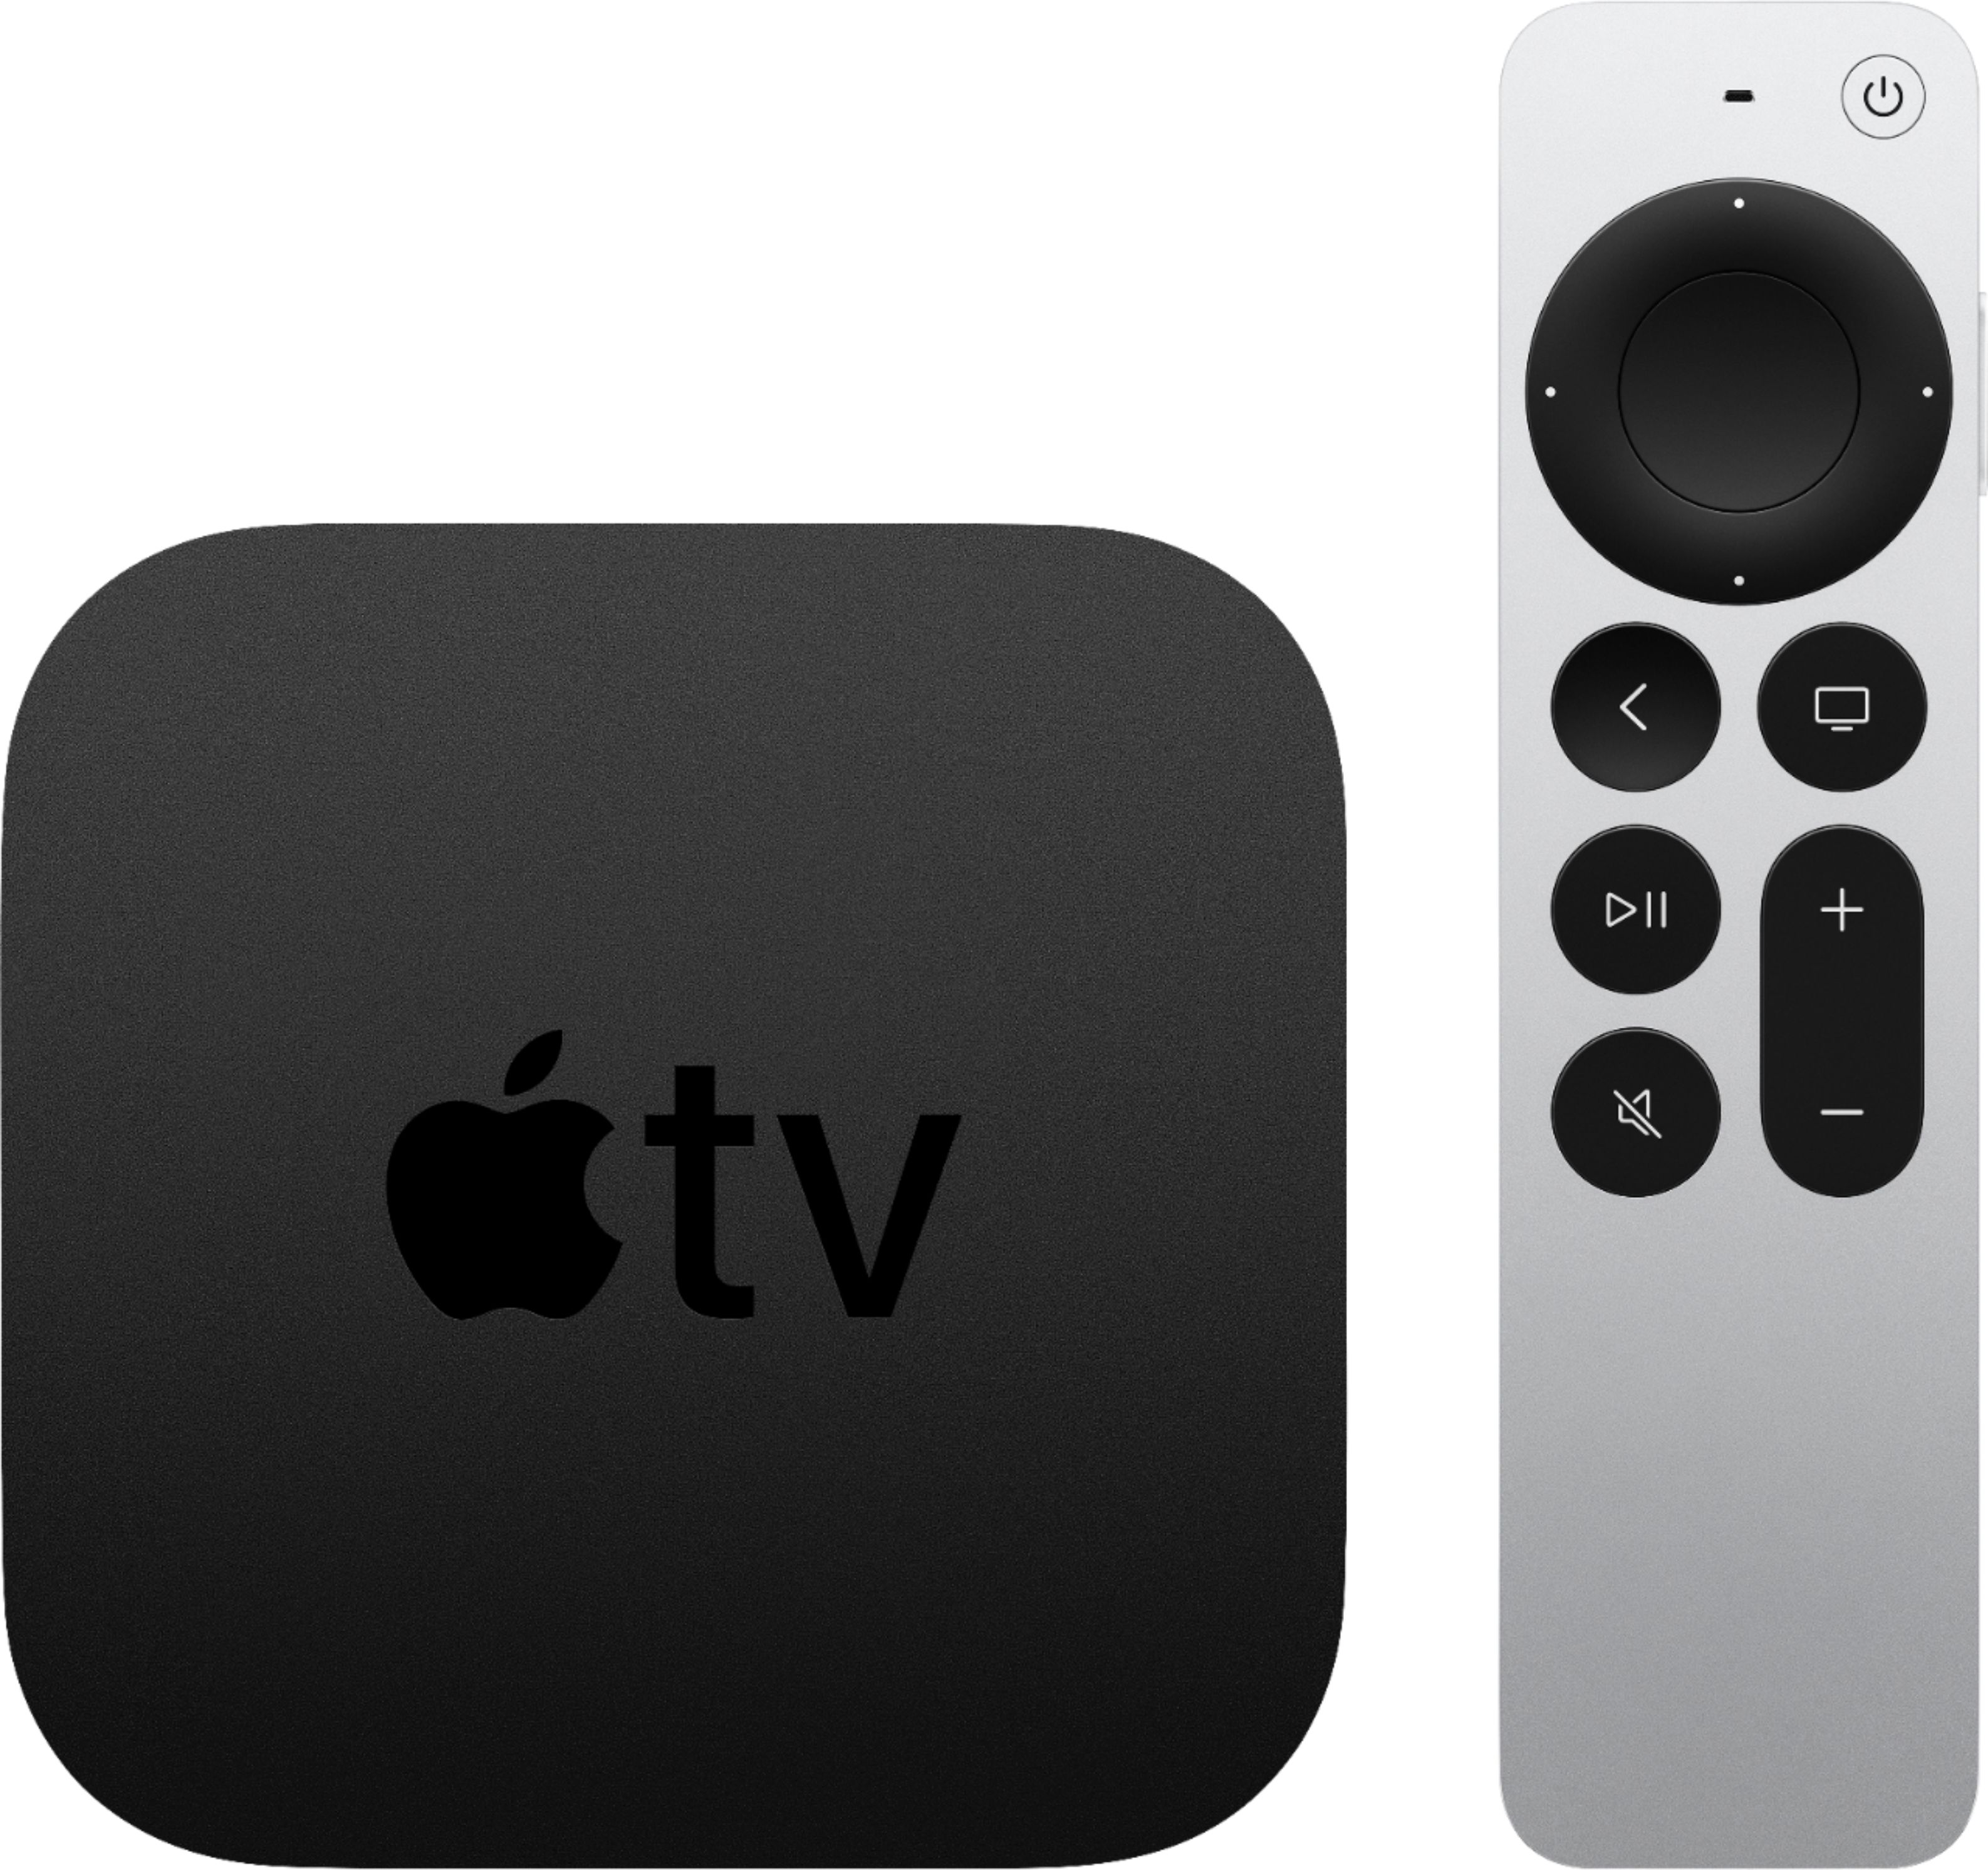 Spectrum Apple TV Vs Cable Box: Which is the better streaming option?